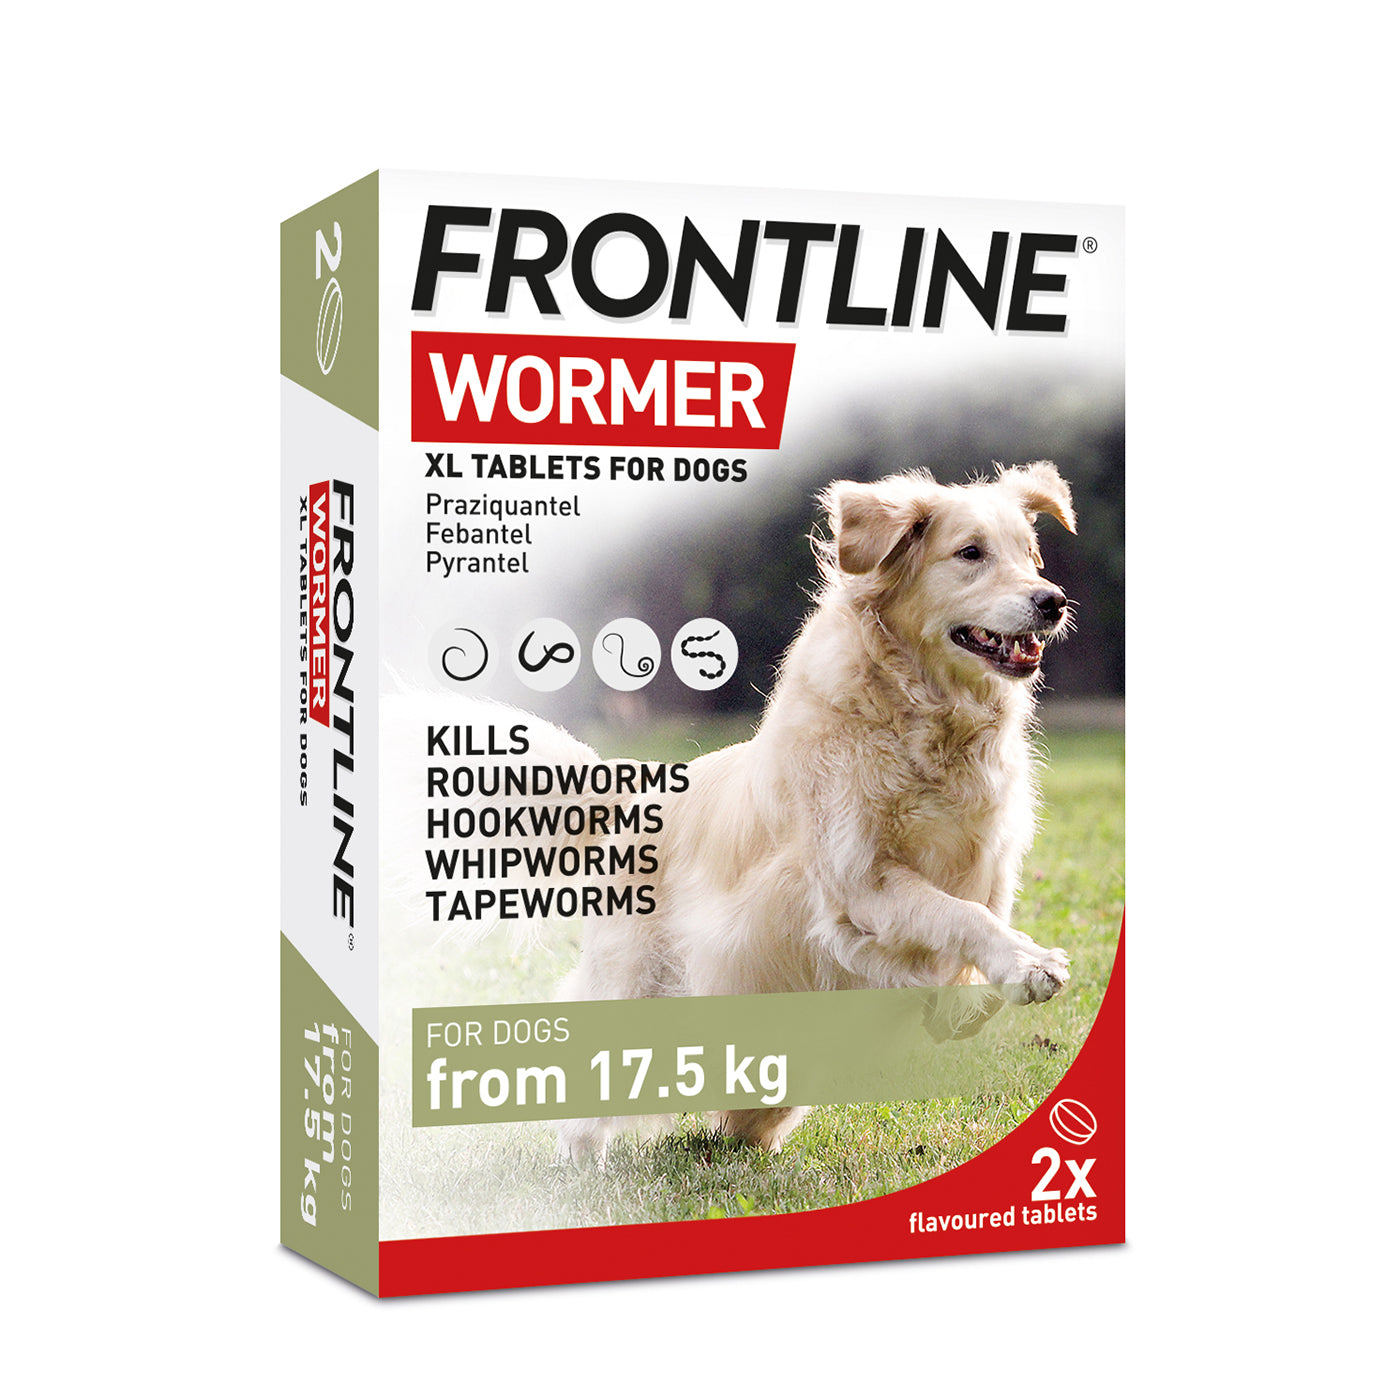 Frontline Wormer XL Tablets for Dogs x2